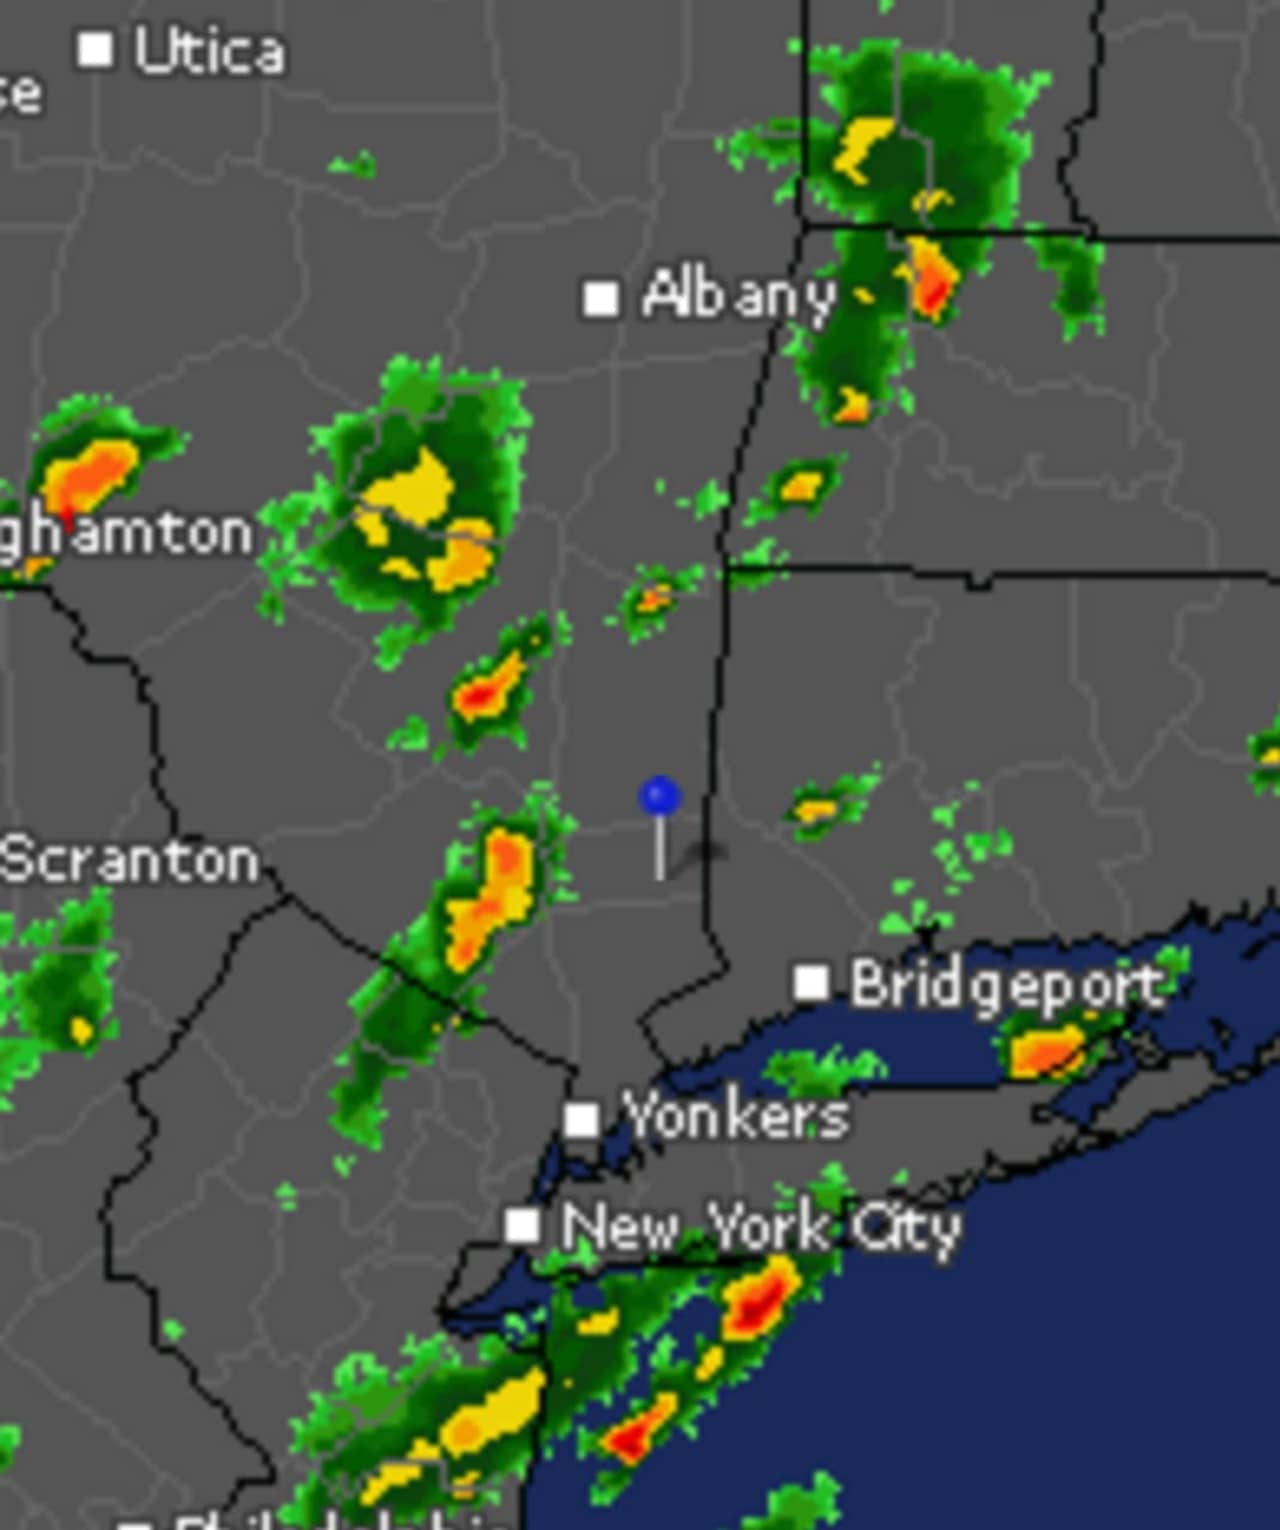 A radar image showing storms moving through the area early Tuesday evening.